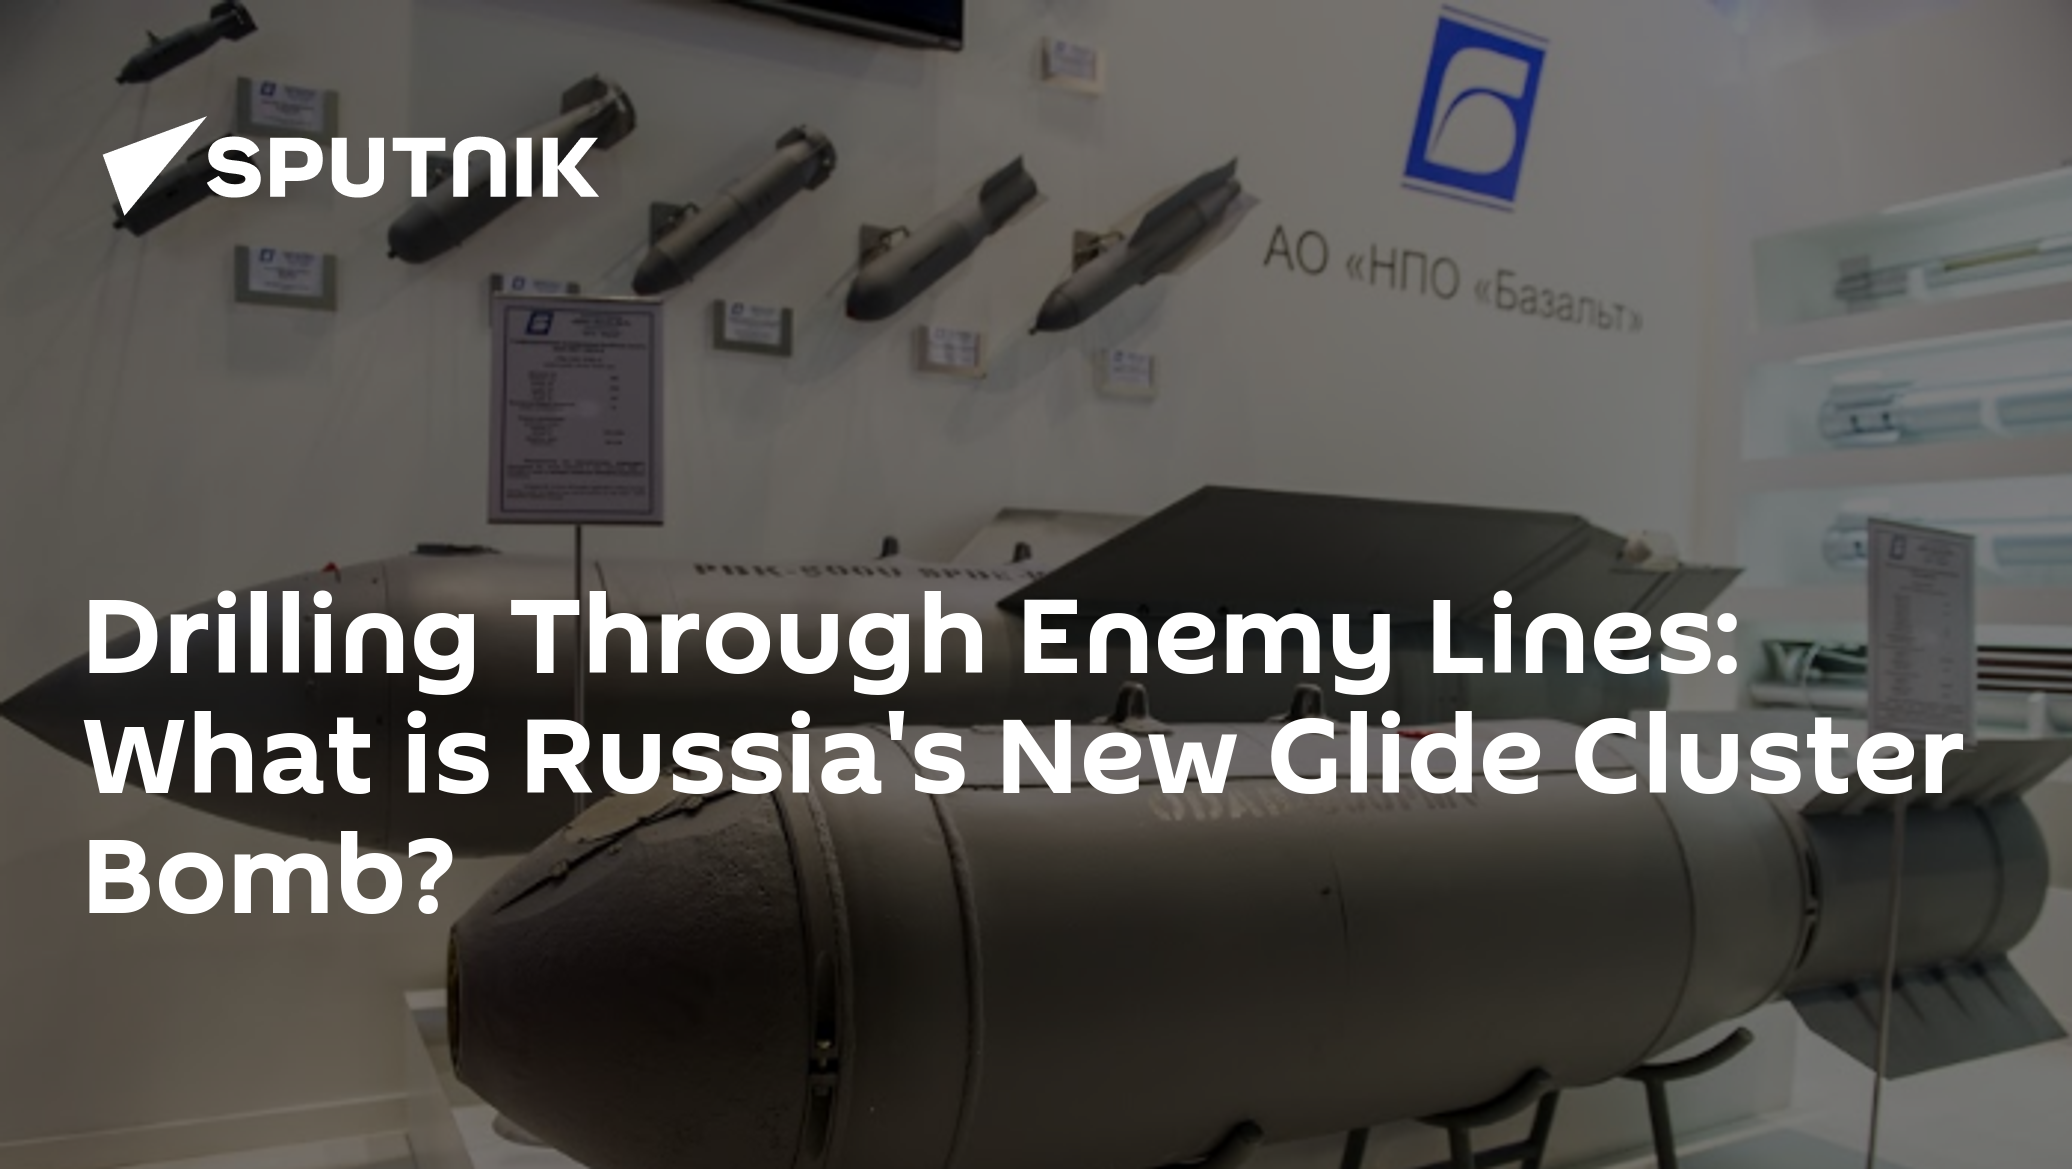 Drilling Through Enemy Lines: What is Russia's New Glide Cluster Bomb?